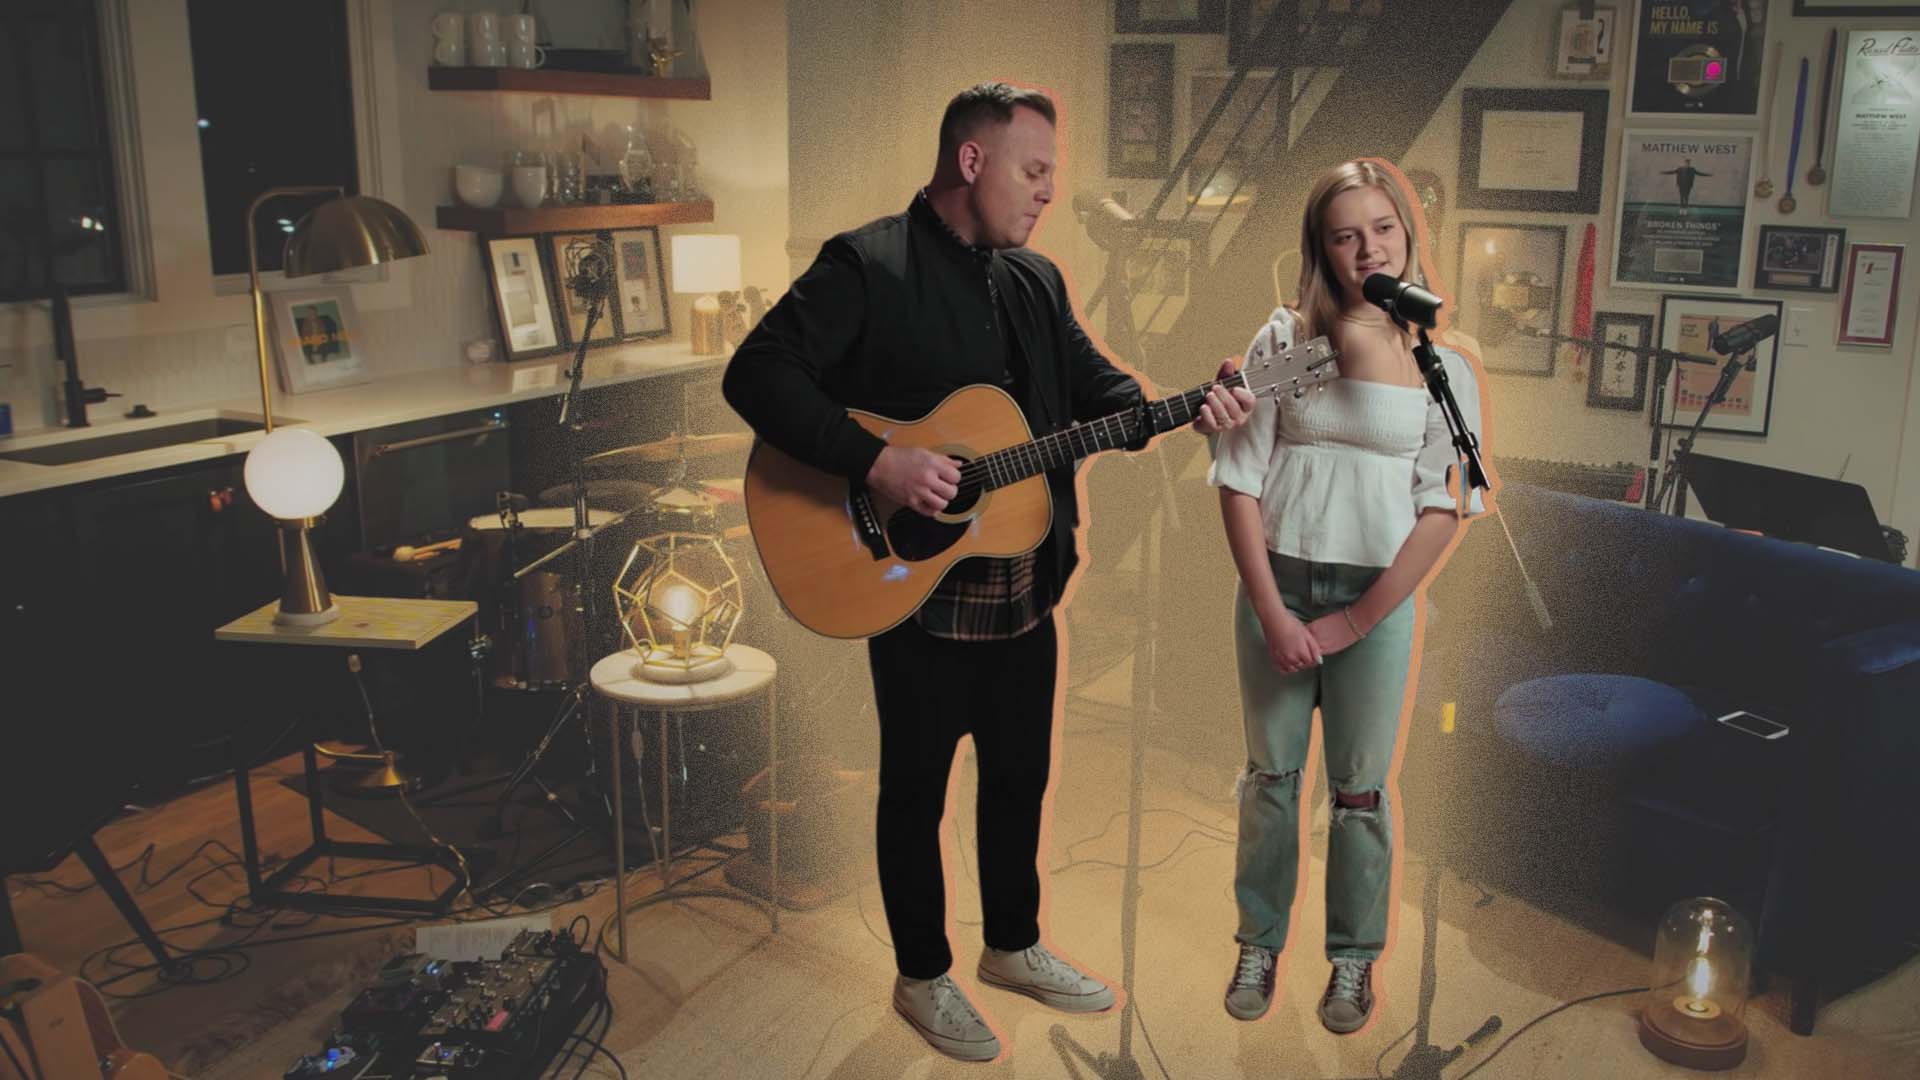 Matthew West and his daughter share a duet in honor of suicide awareness month